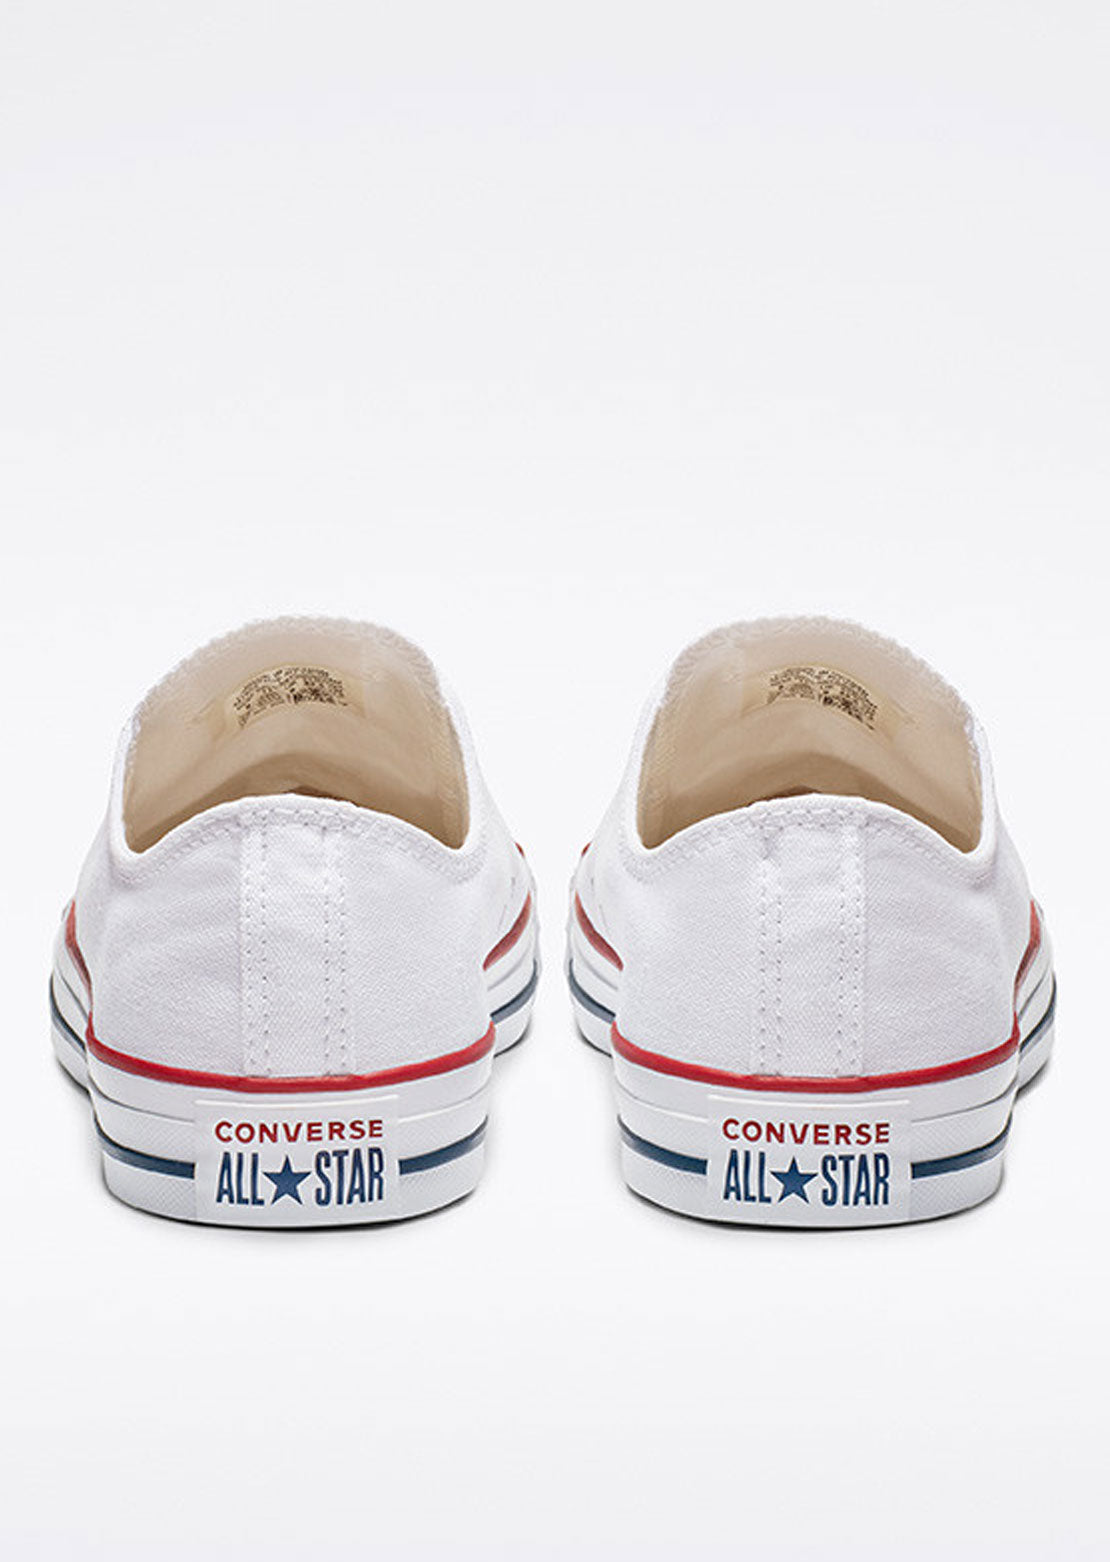 Converse Unisex Chuck Taylor All Star Low Top Shoes Optical White